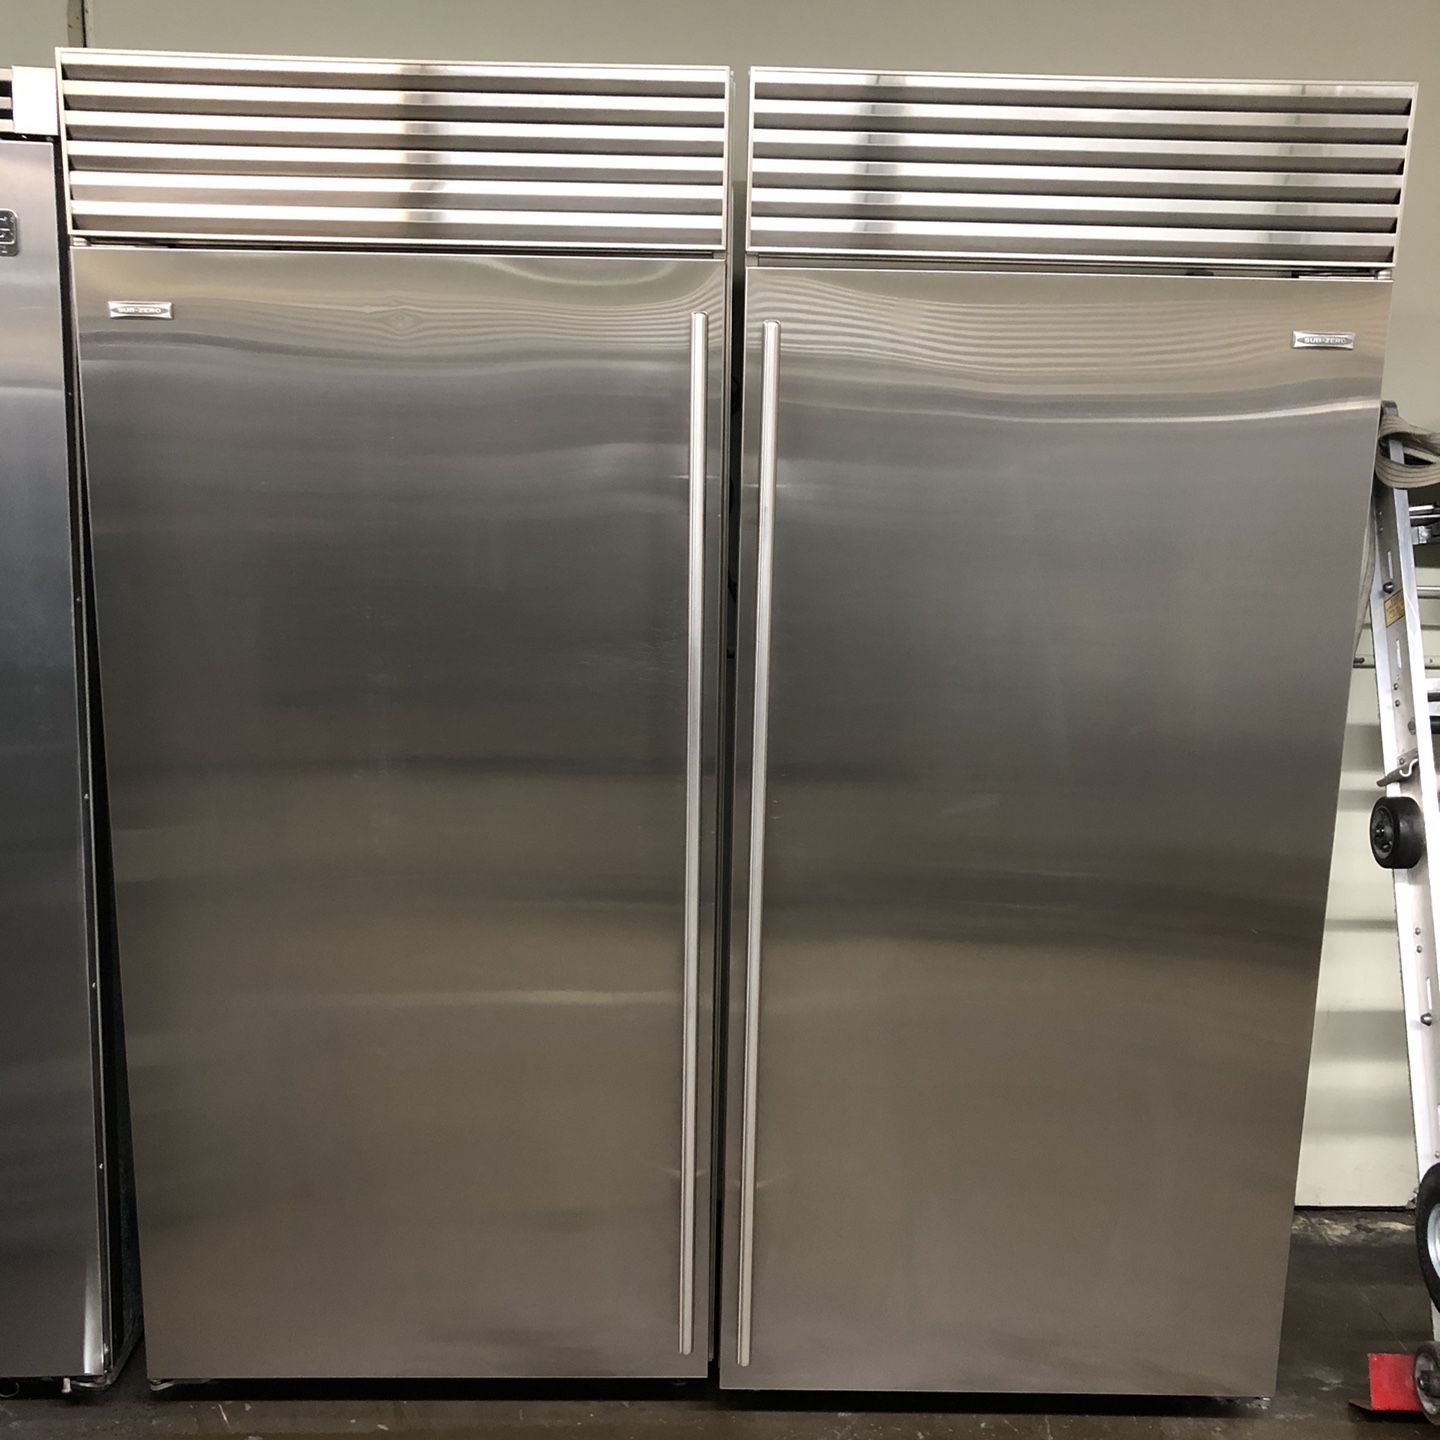 Sub Zero 72”Wide Stainless Steel Built In Side By Side Refrigerator Columns 